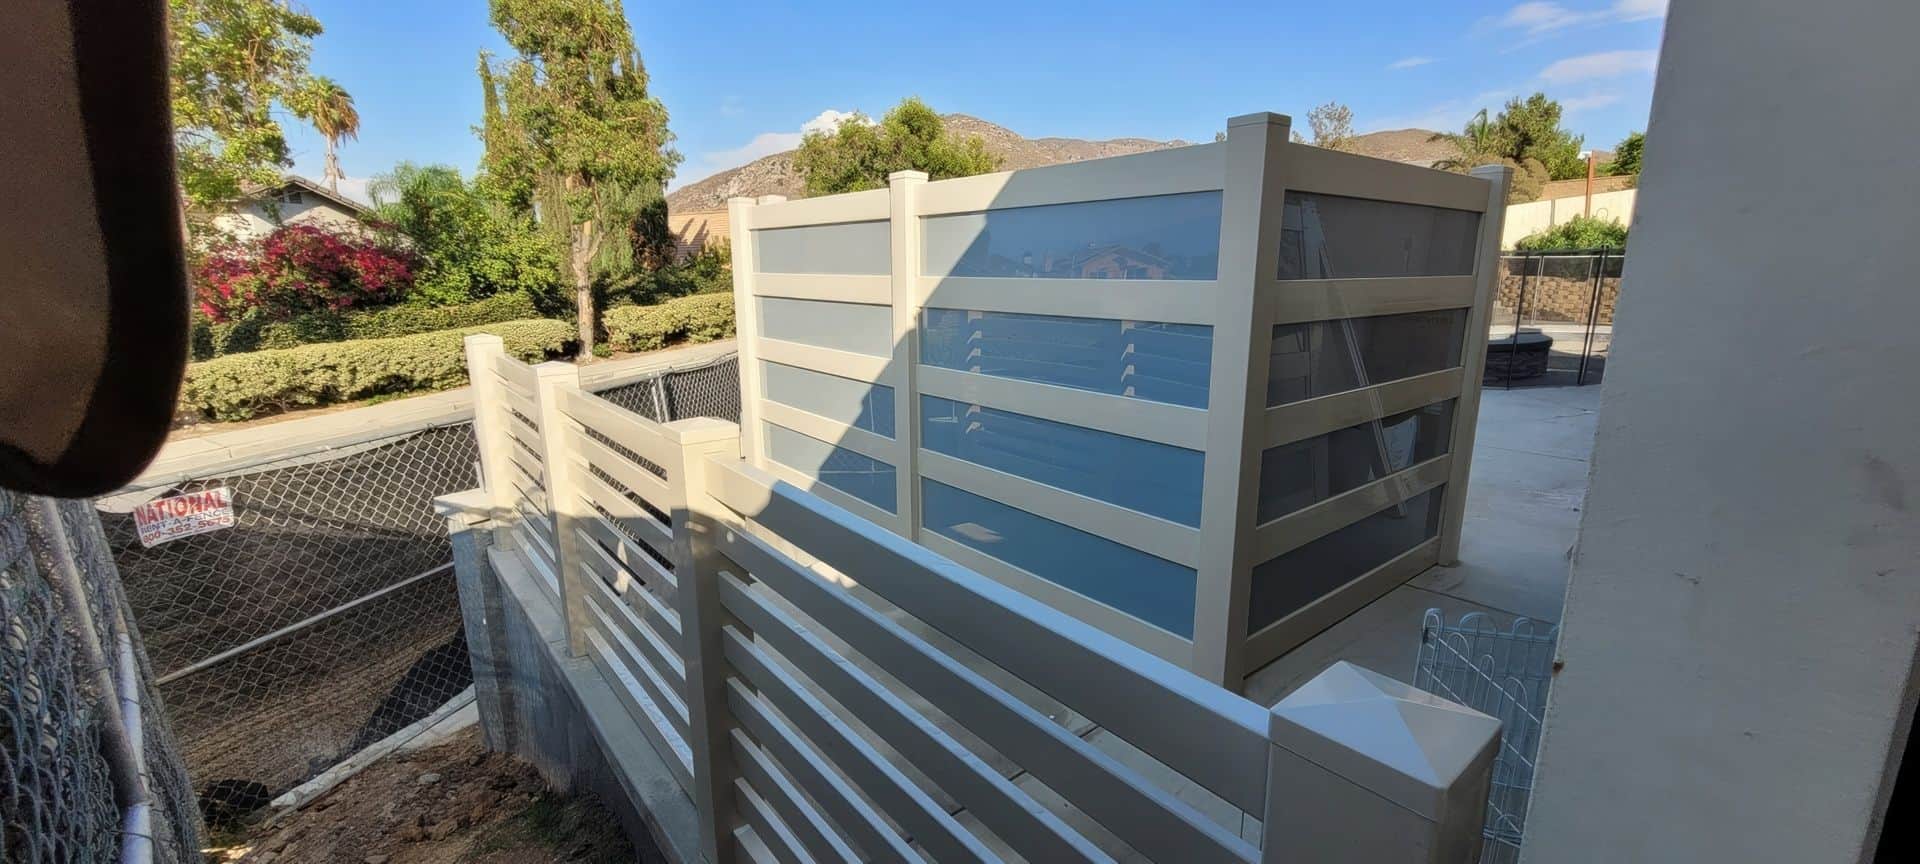 Vinyl & acrylic privacy fence, concrete floor, chainlink boundary wall, added privacy, trees in background.